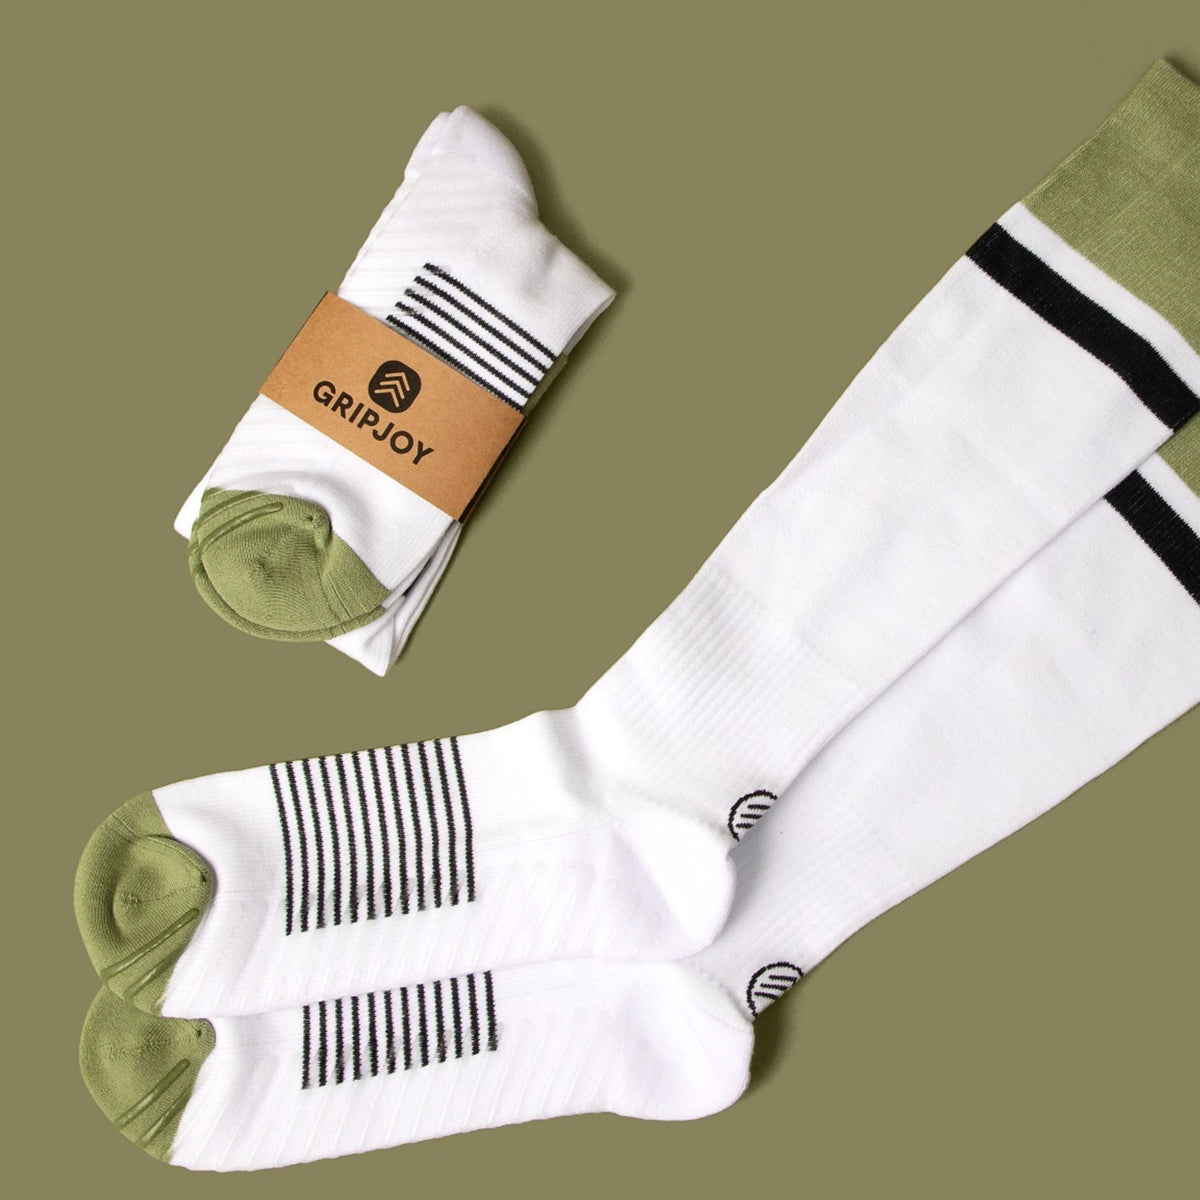 Men's White/Black/Green Compression Socks with Grips - 4 Pairs